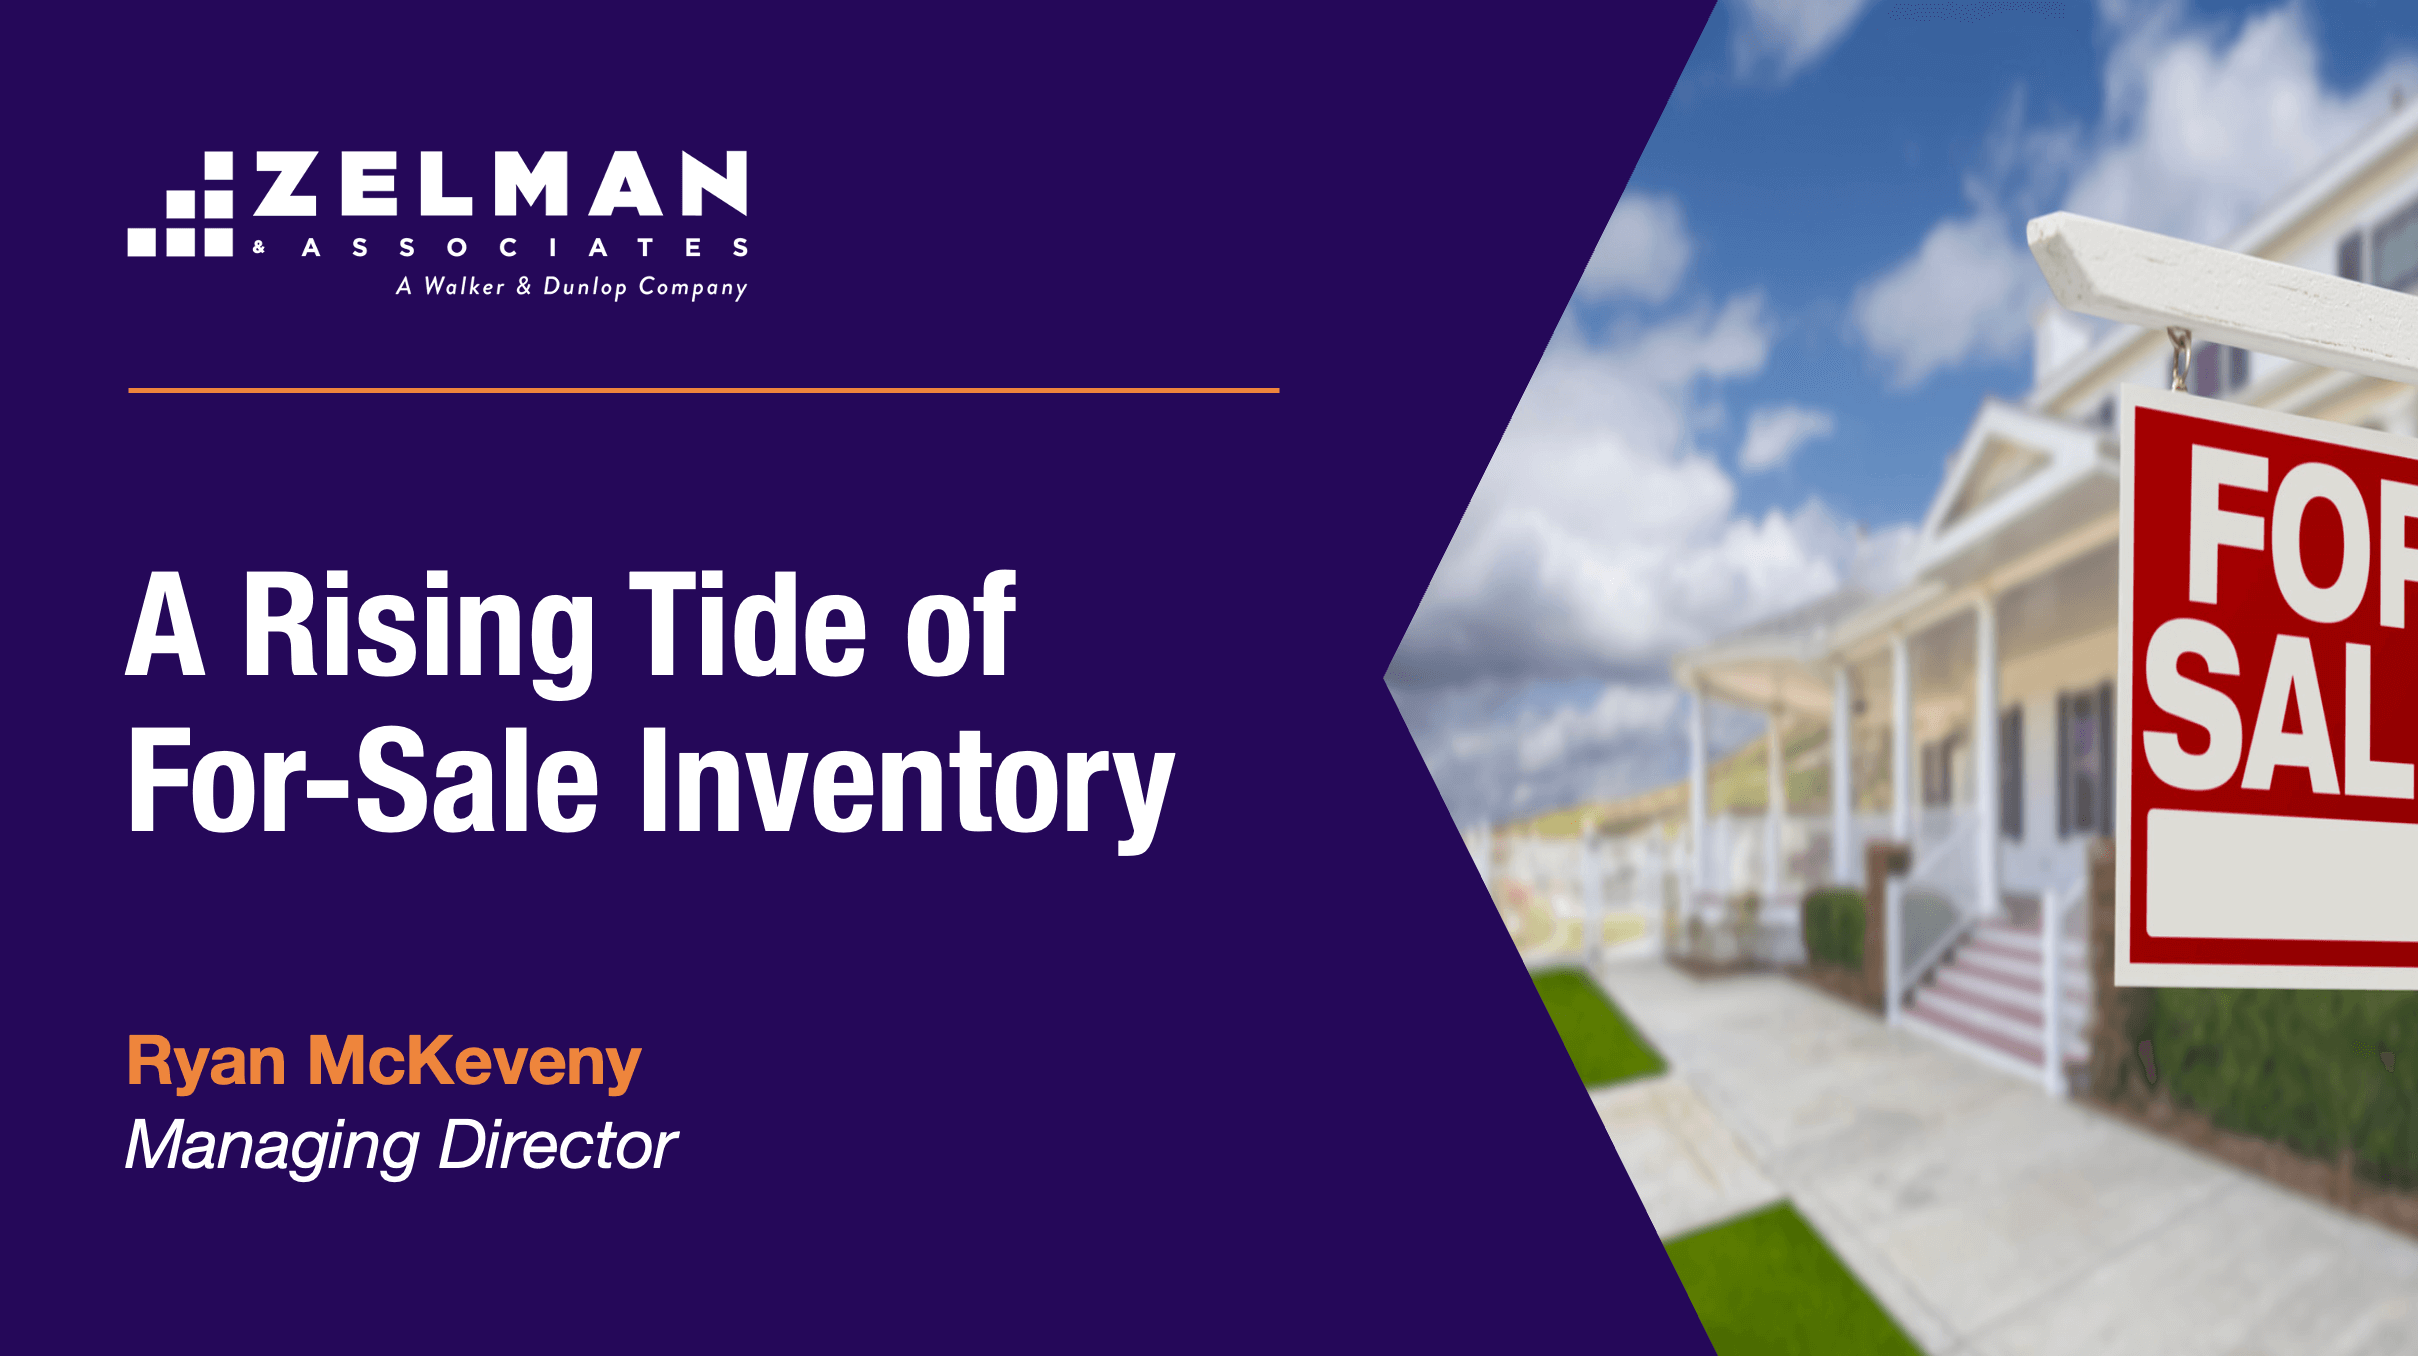 A Rising Tide of For-Sale Inventory